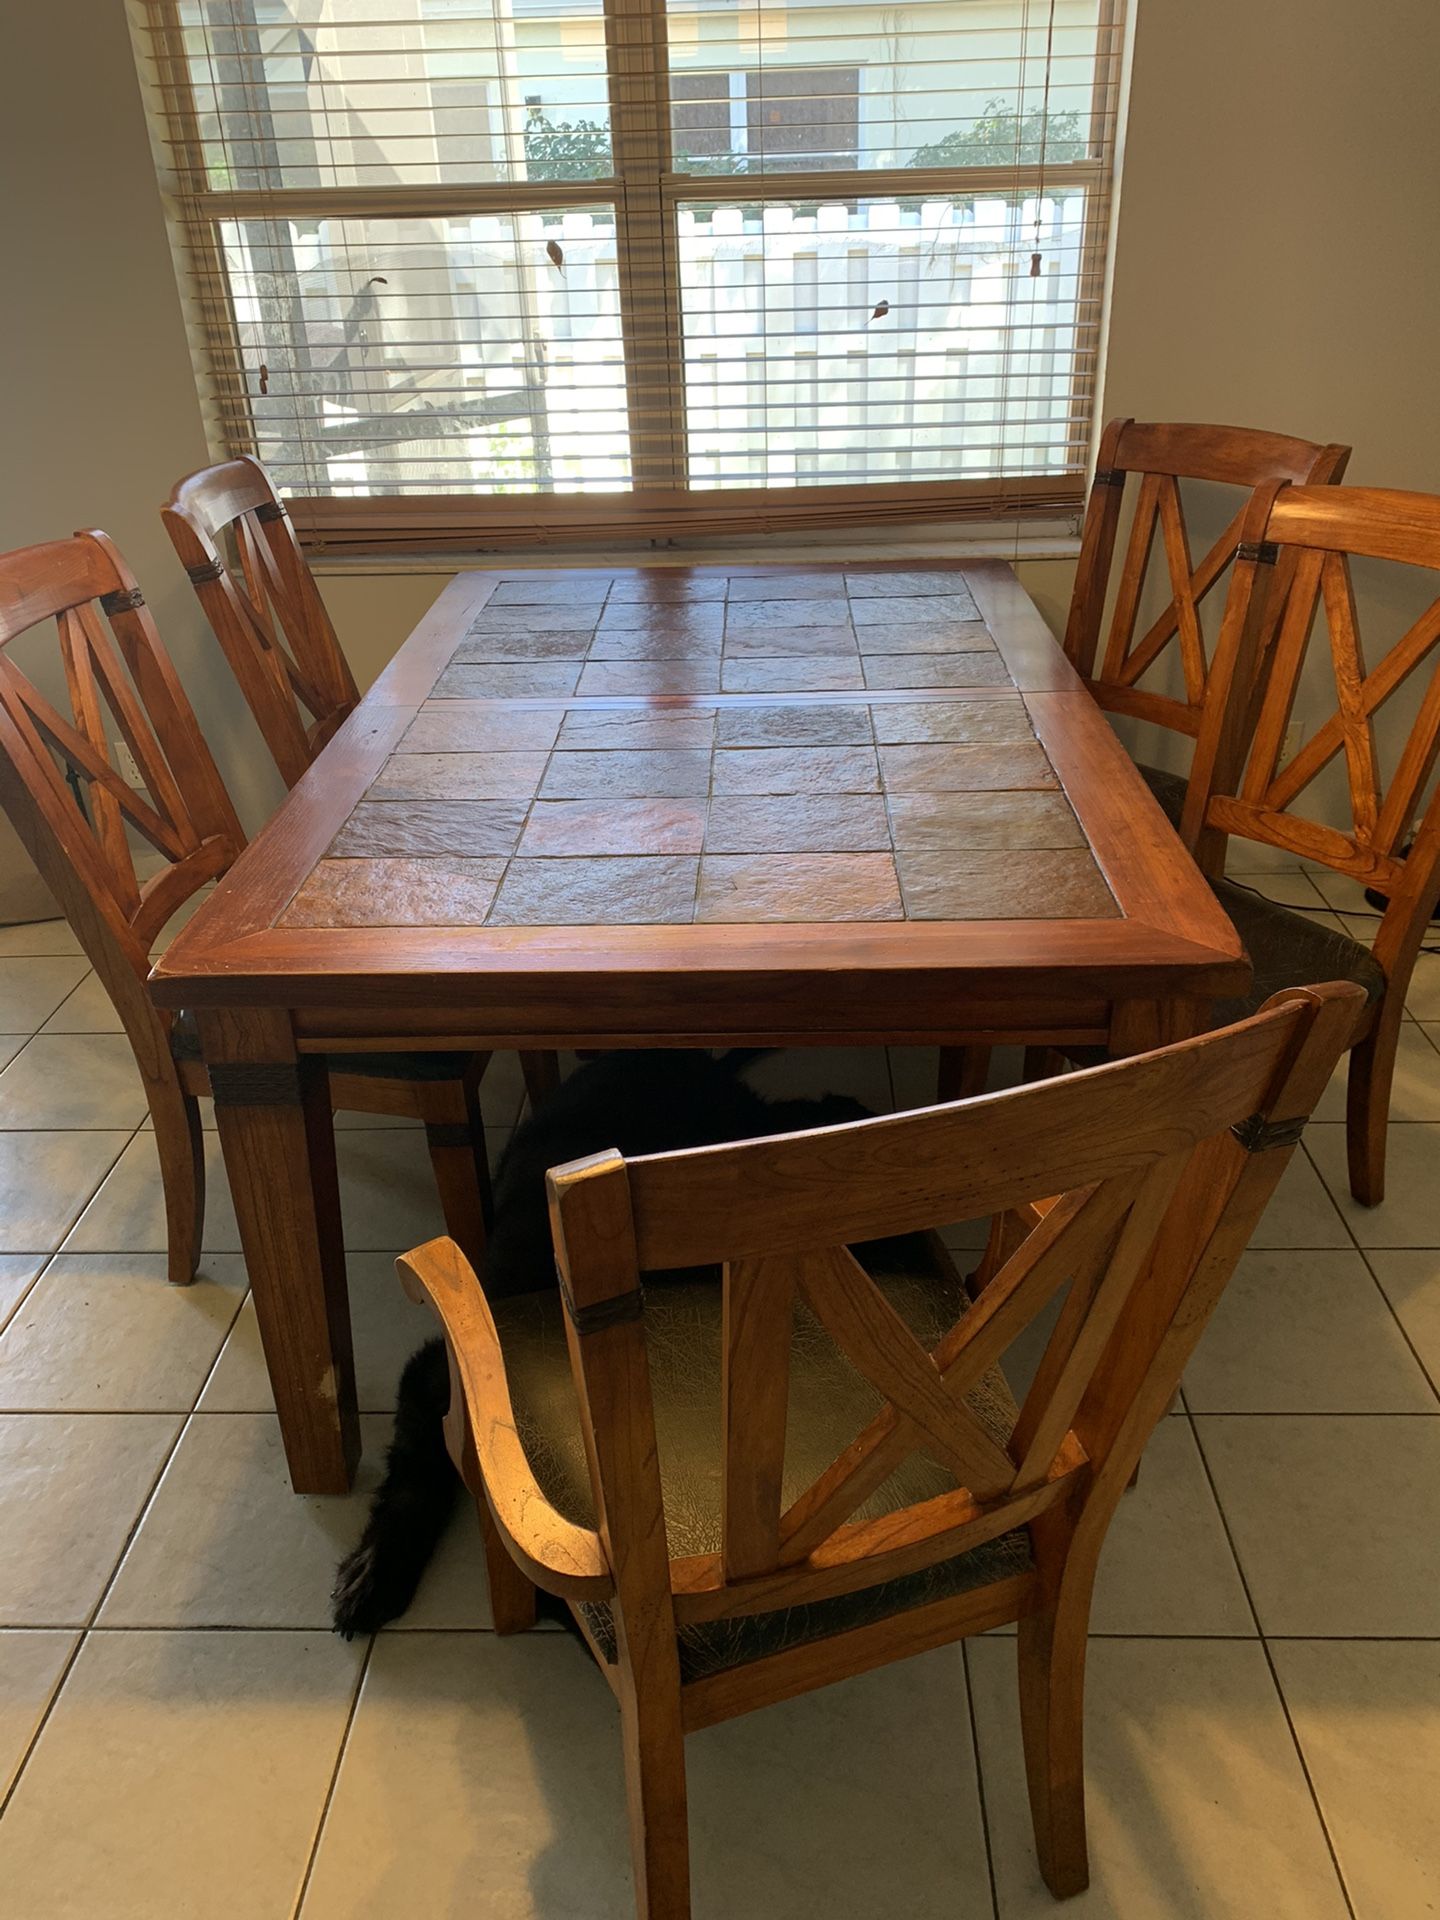 Rustic hardwood dining table with 5 chairs